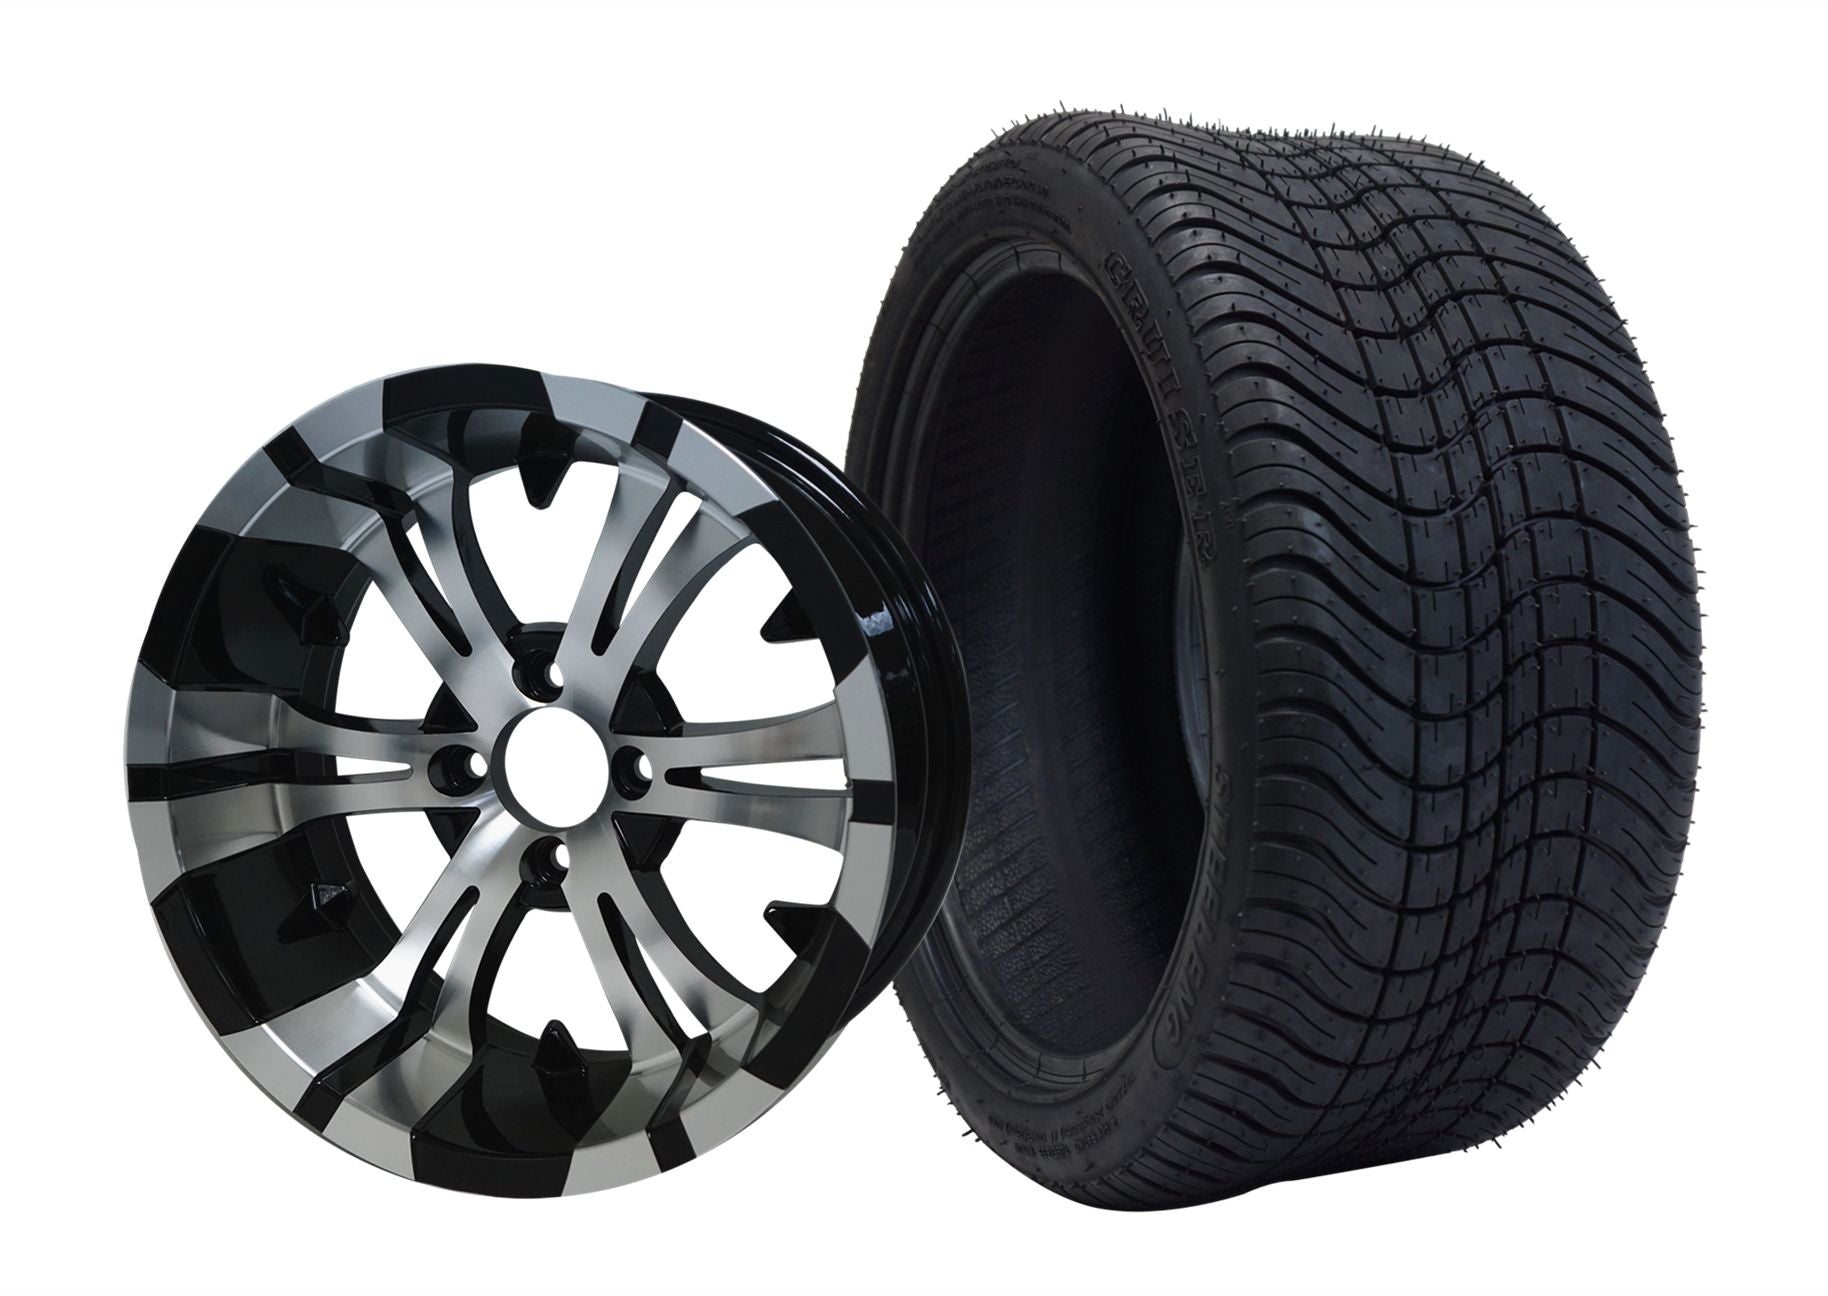 SGC 14" x 7" Vampire Machined/Black Wheel - Aluminum AlloySTEELENG 205/30-14 Low Profile Tire DOT approved WH1413-TR1404